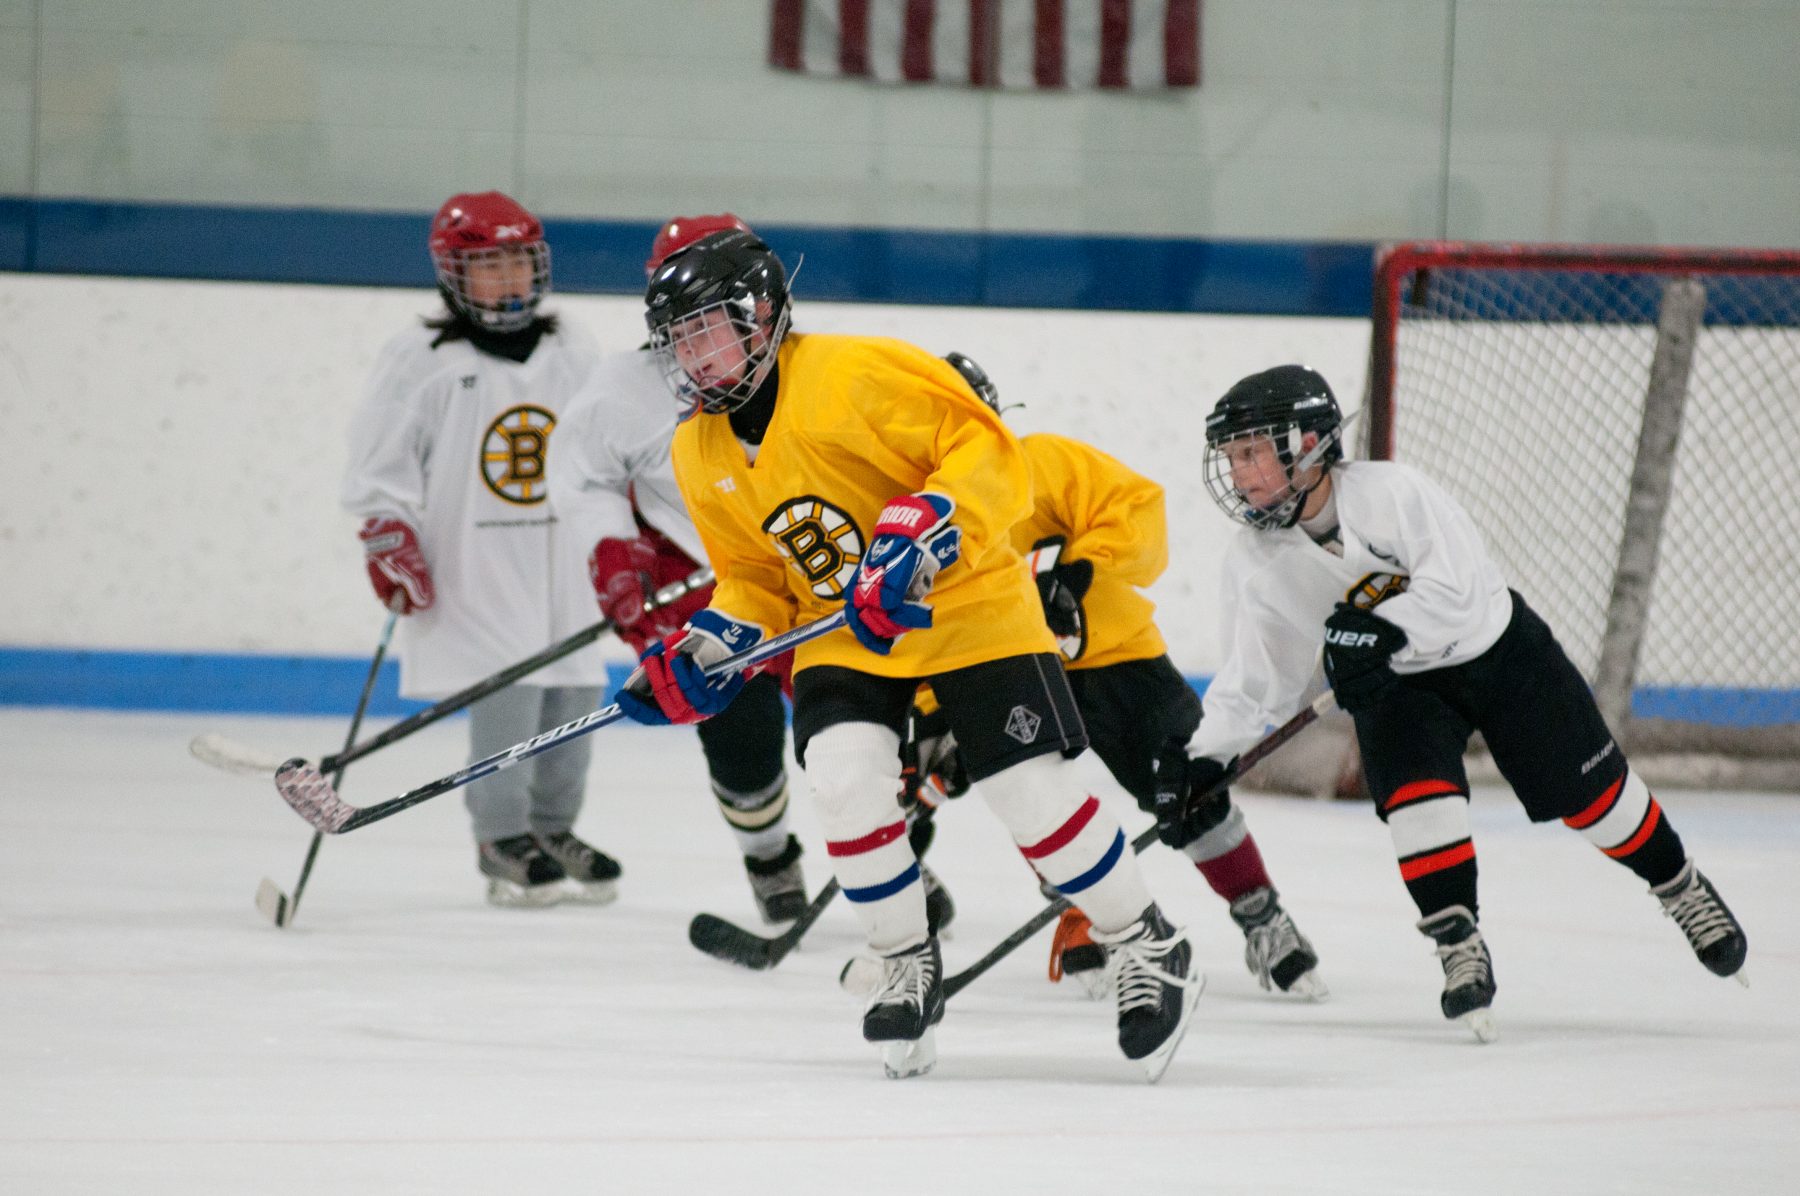 Monday, April 11, 2011--The Boston Bruins hosted a clinic for youth hockey players, sponsored by Warrior, in Burlington, Mass.